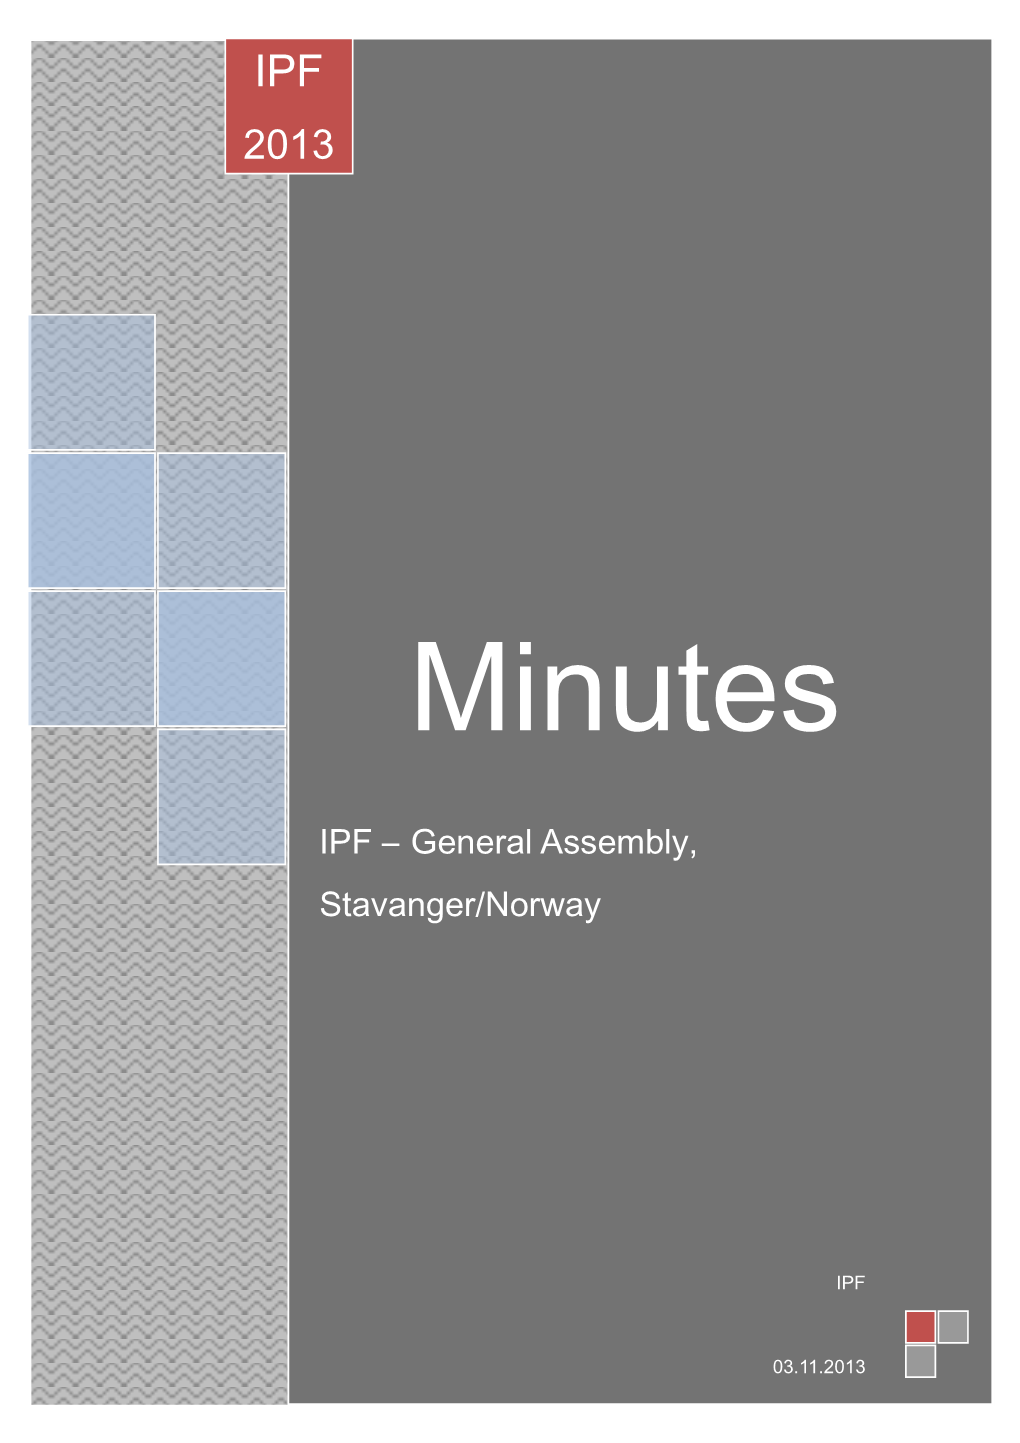 IPF – General Assembly, Stavanger/Norway